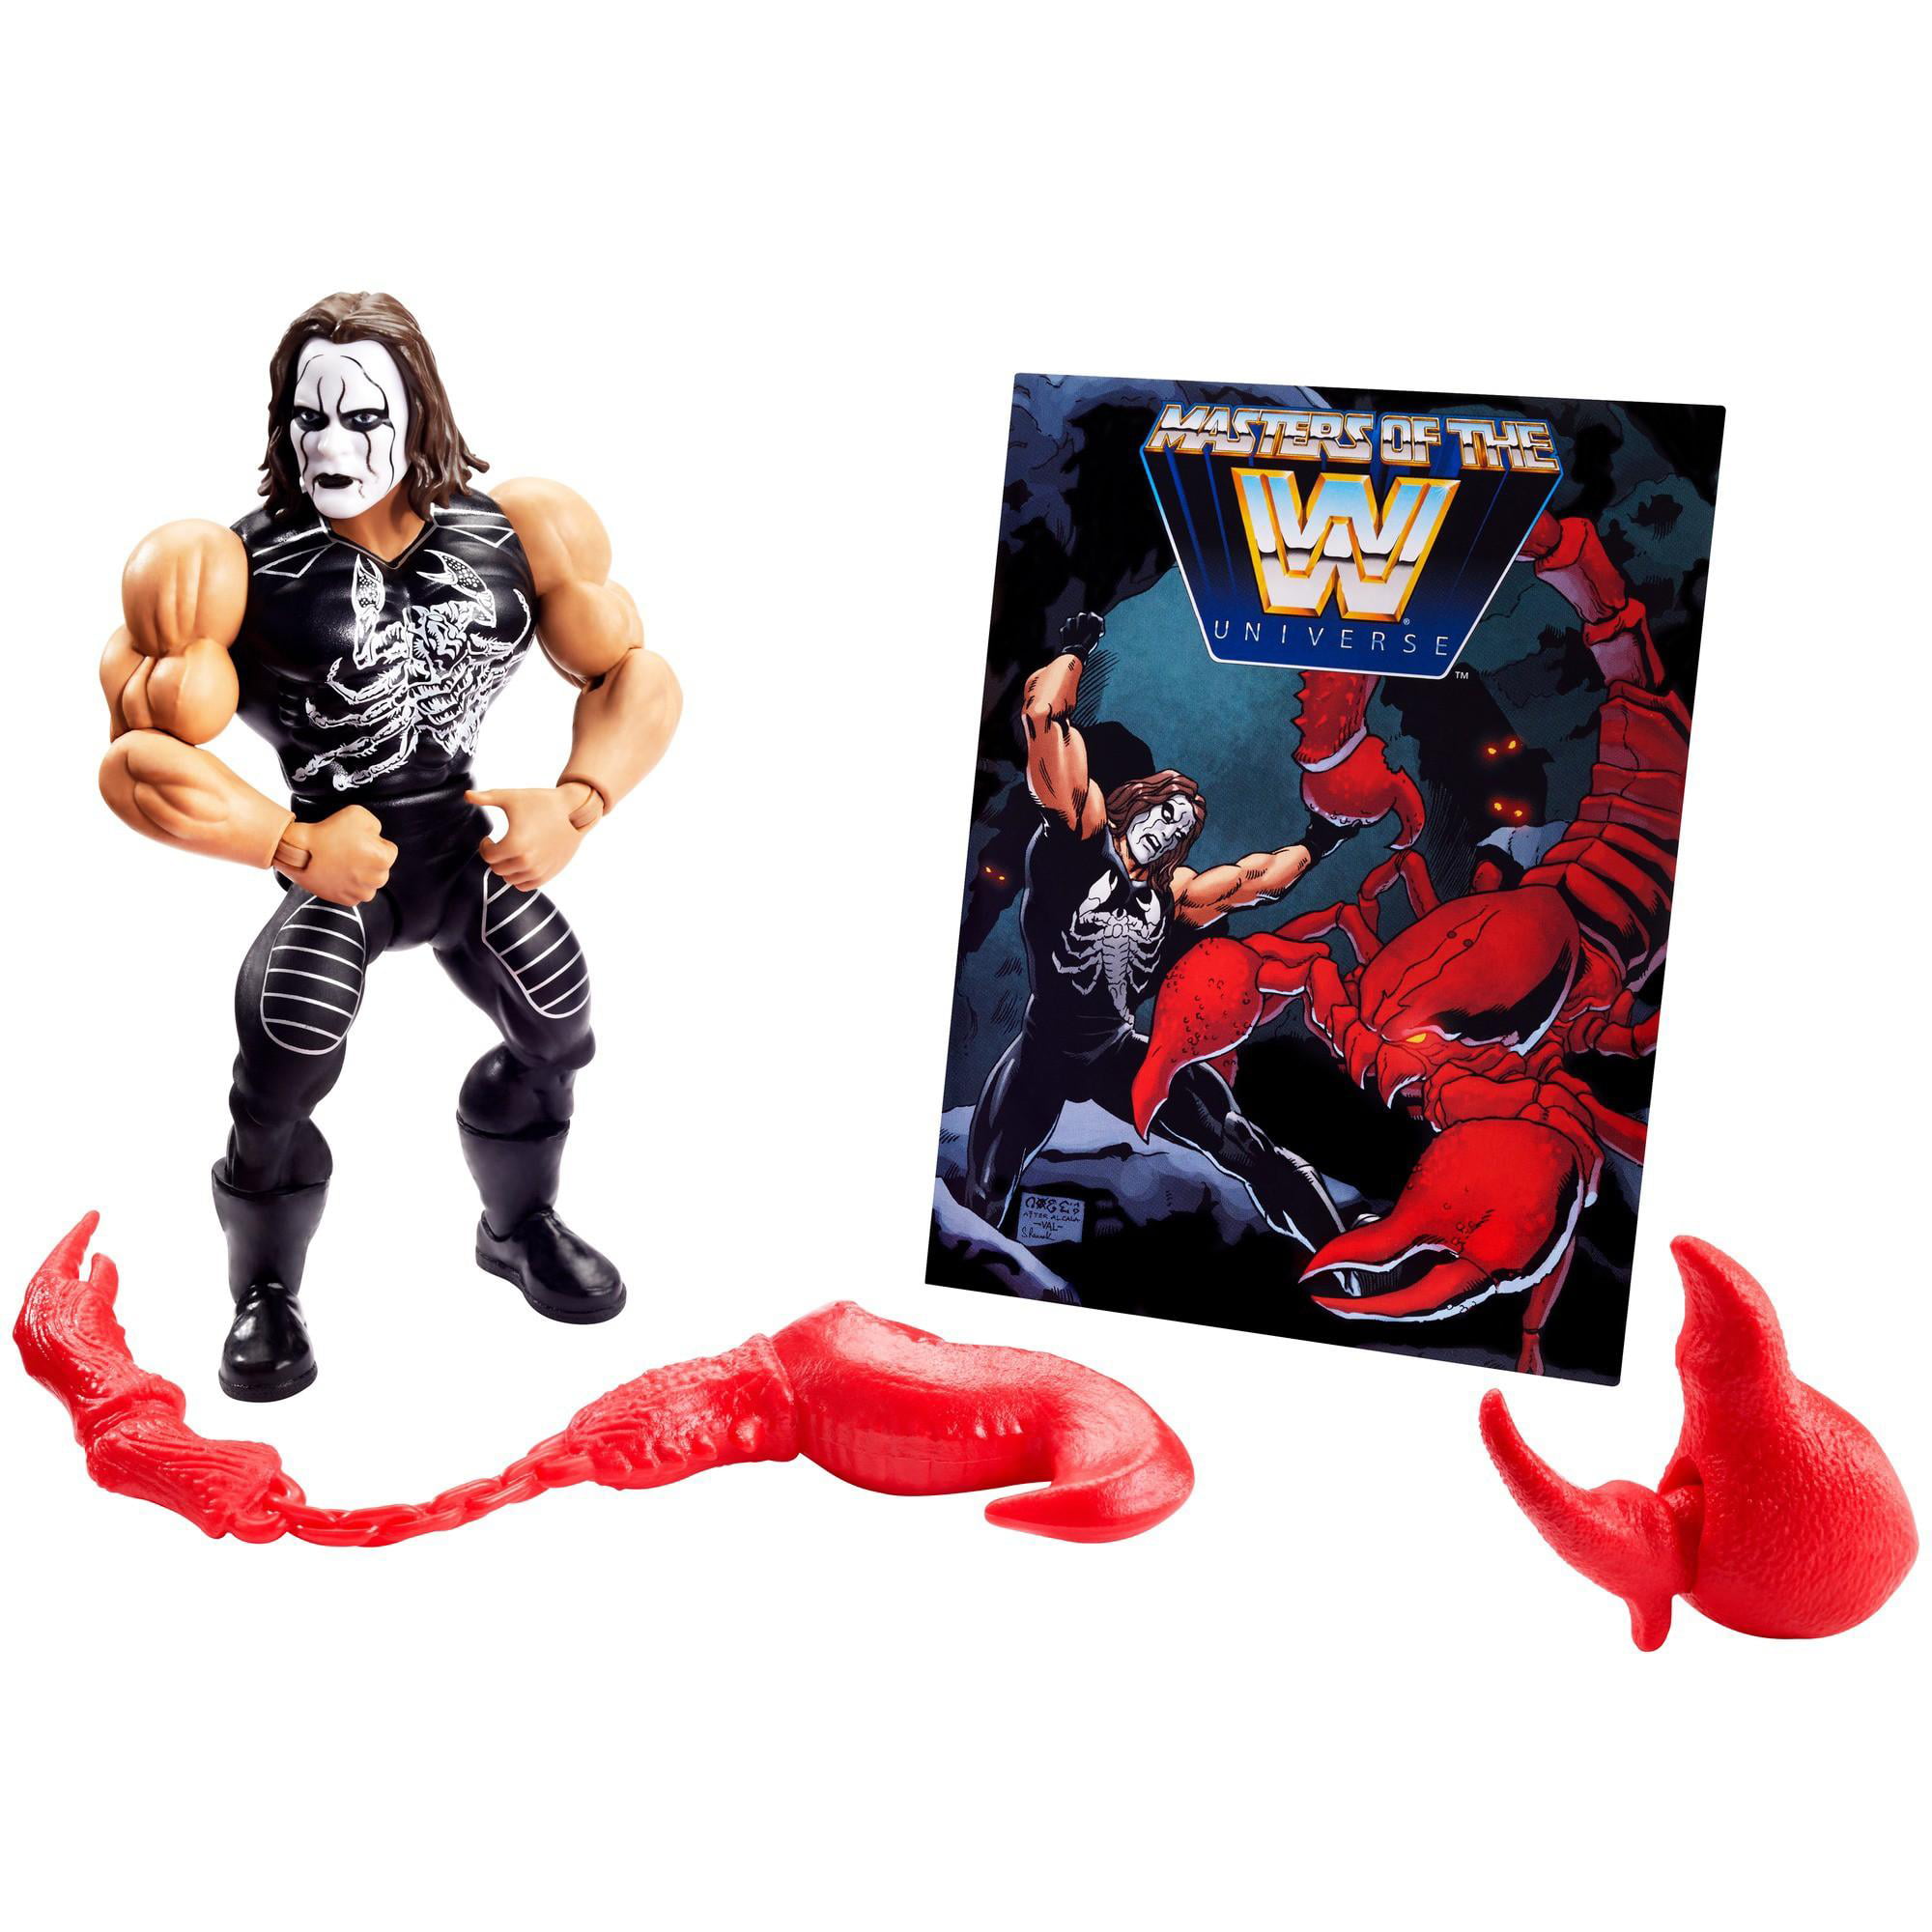 WWE Masters of The Universe Wave 1 Sting Action Figure MOTU 2019 Mattel for sale online 